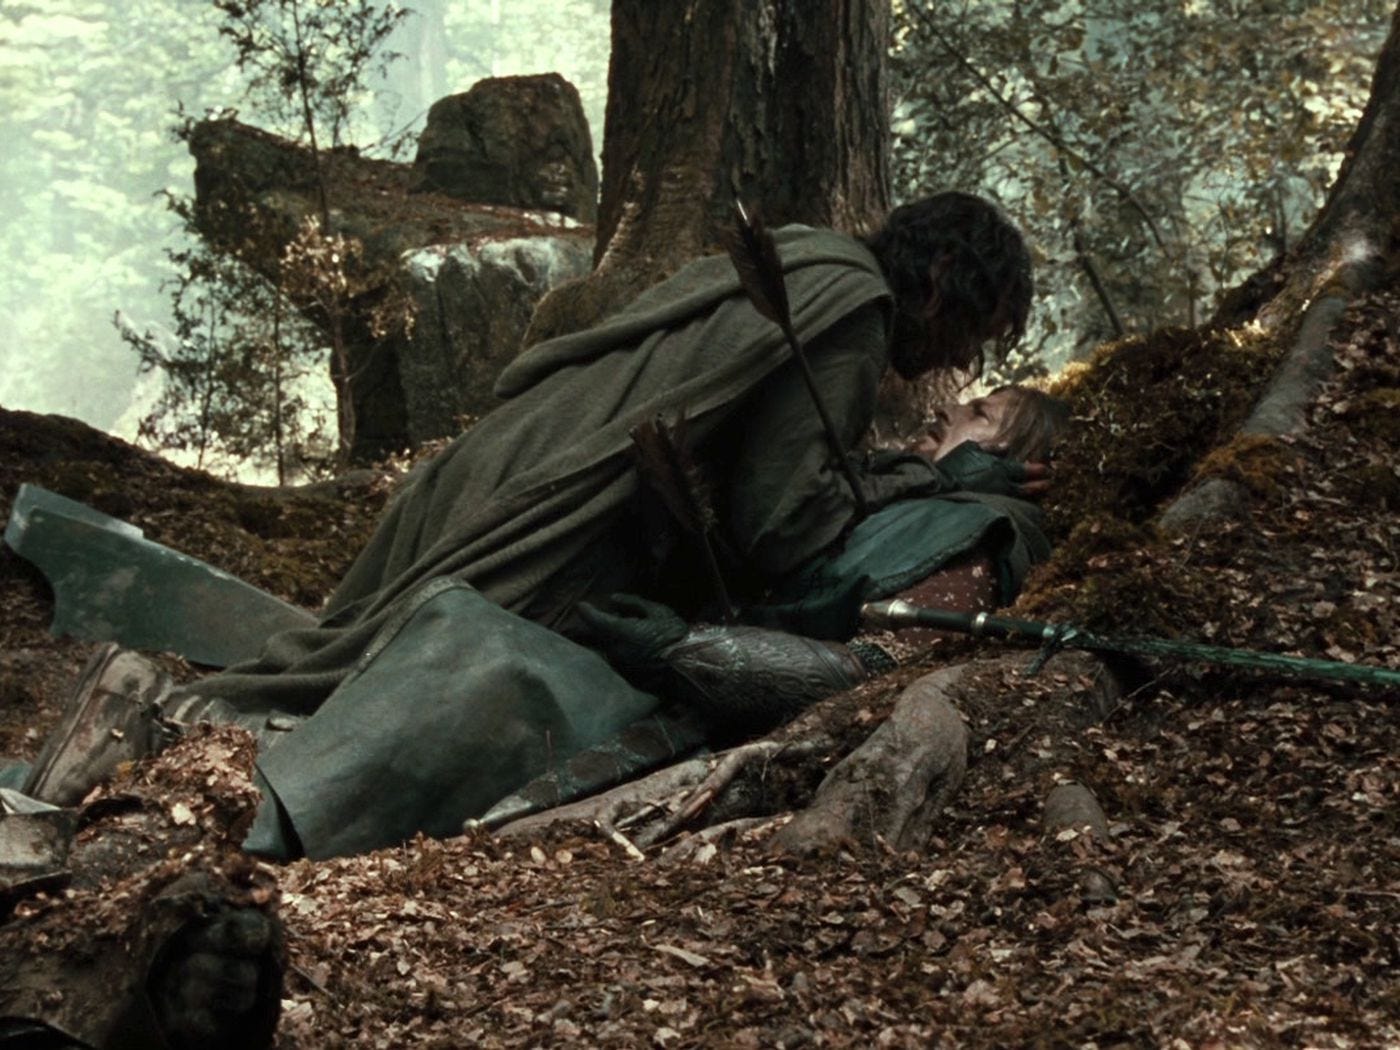 Lord of the Rings' Boromir death scene revived soft masculinity with a kiss  - Polygon